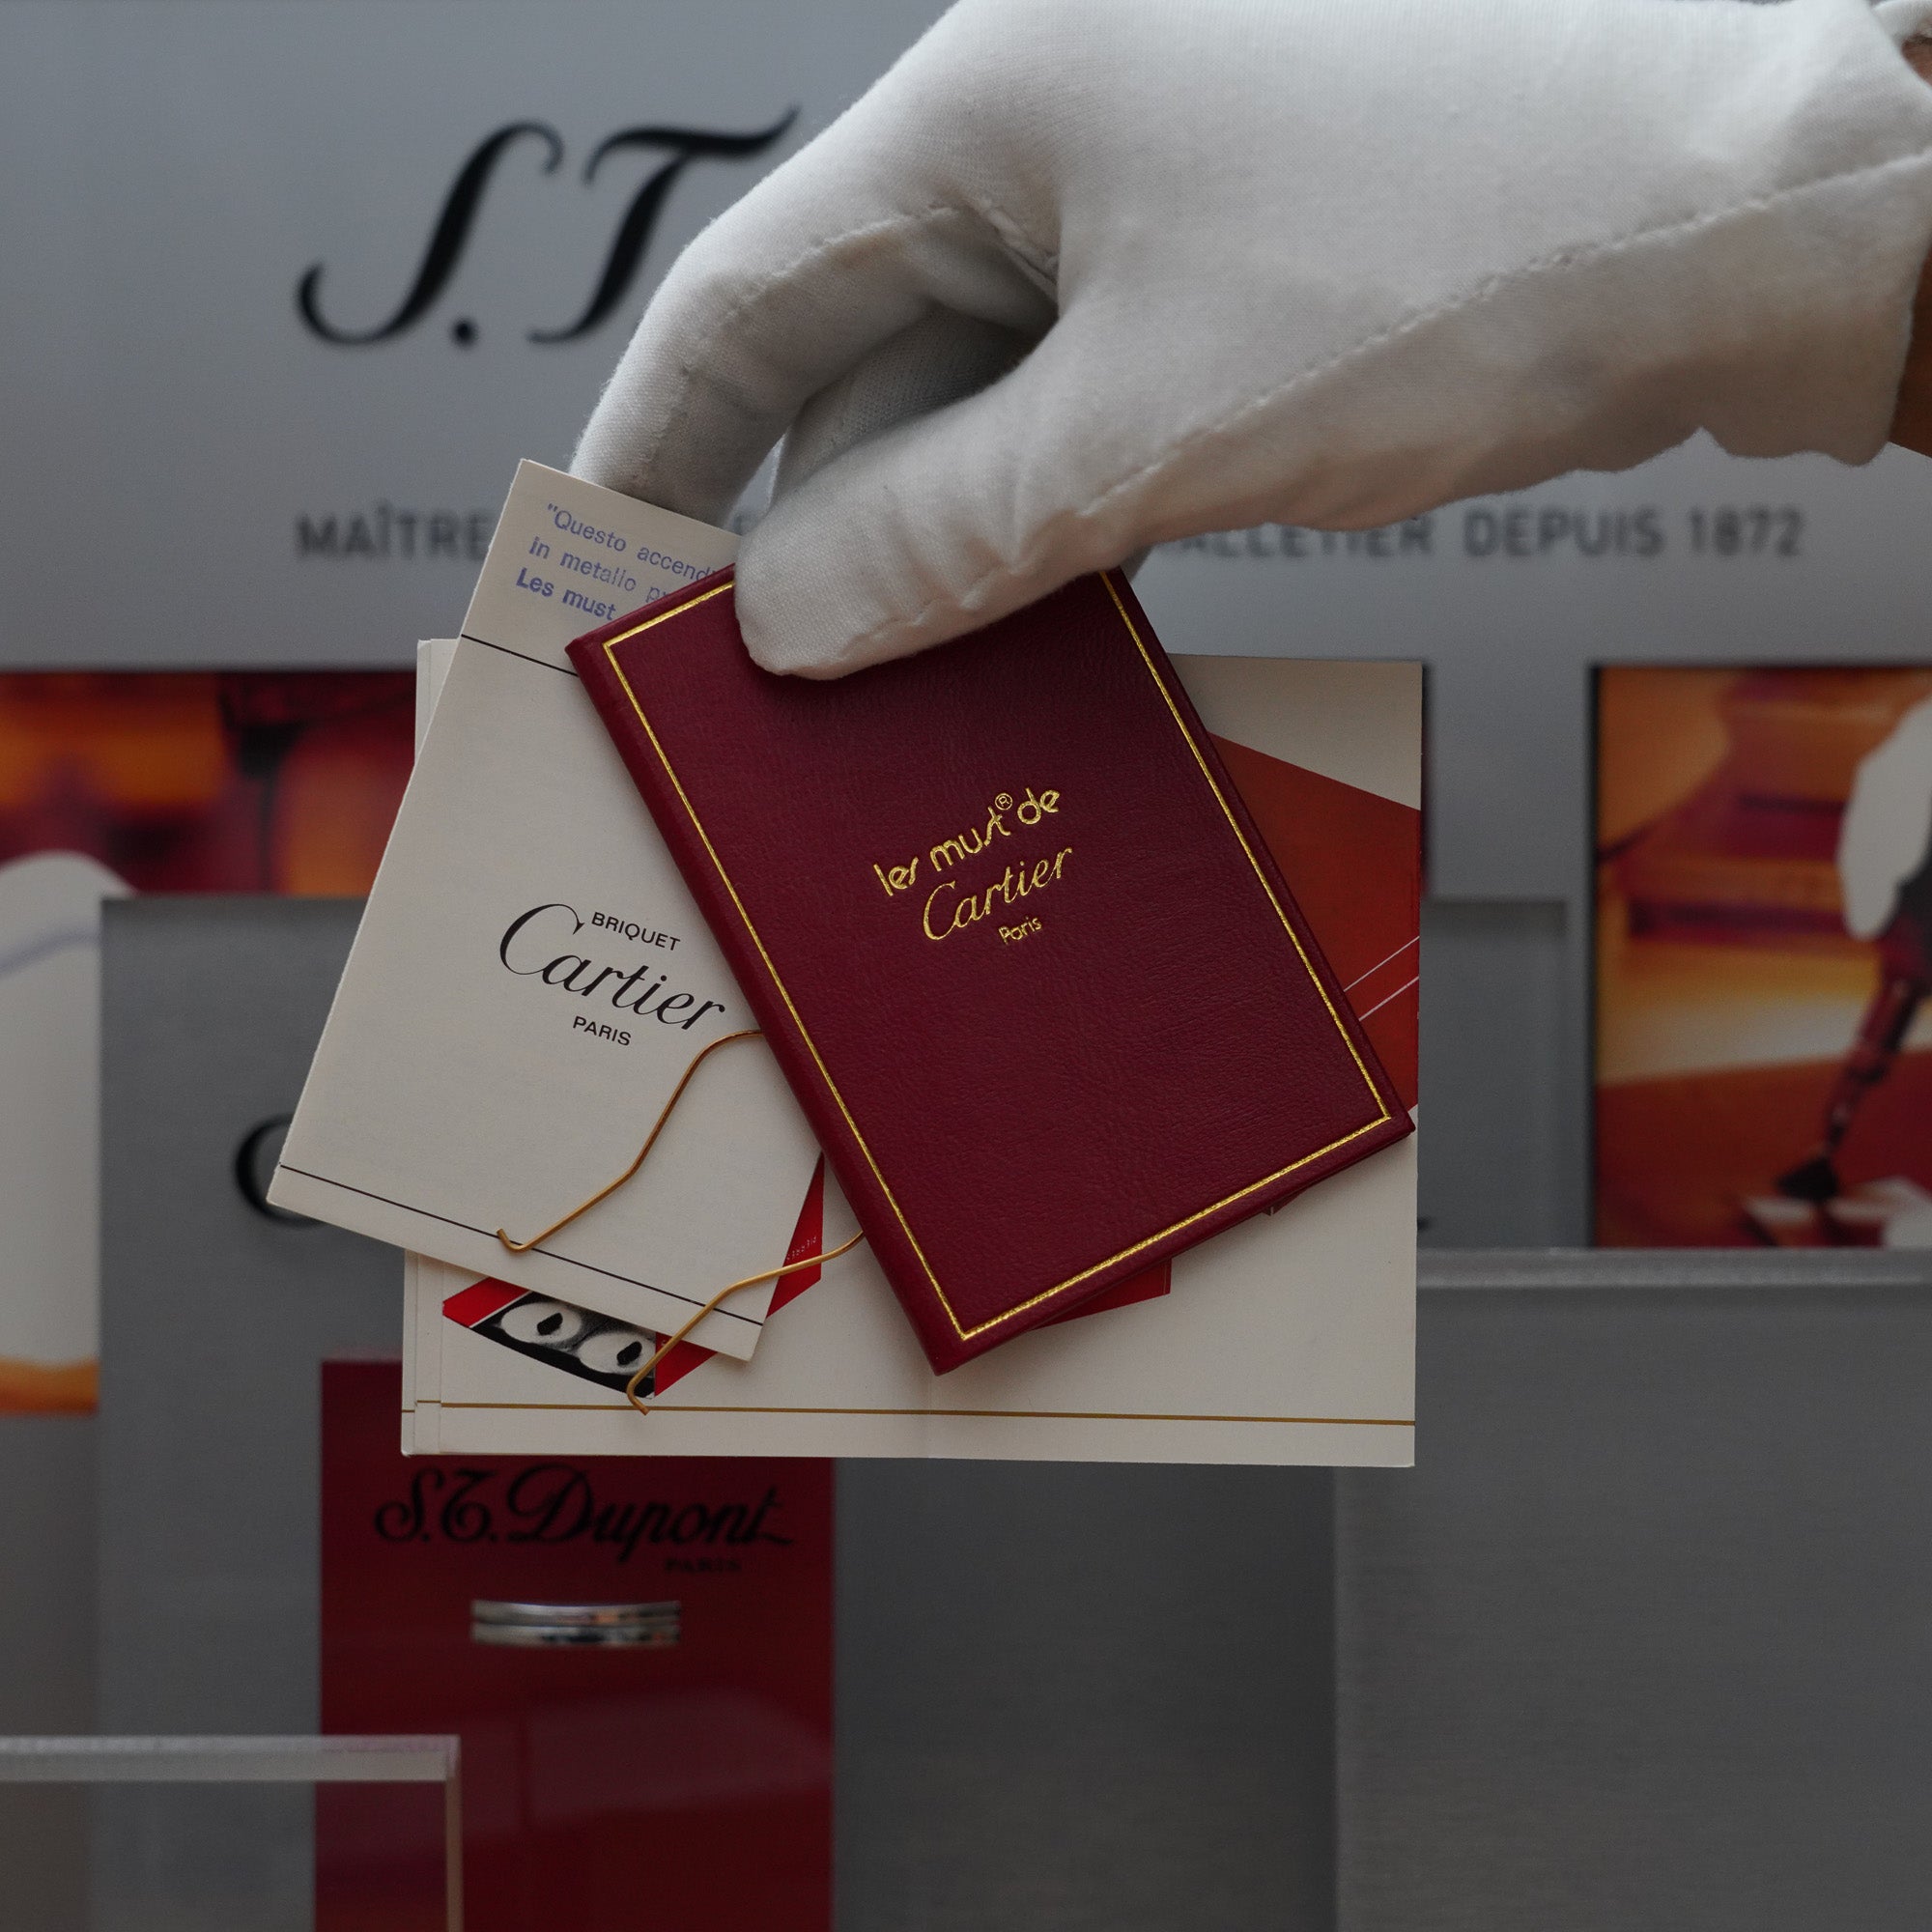 A hand is holding a Vintage 1980 Cartier Solid Silver 925 & Gold Factory iconic 18k Double C de Cartier logo lighter in front of a display case.